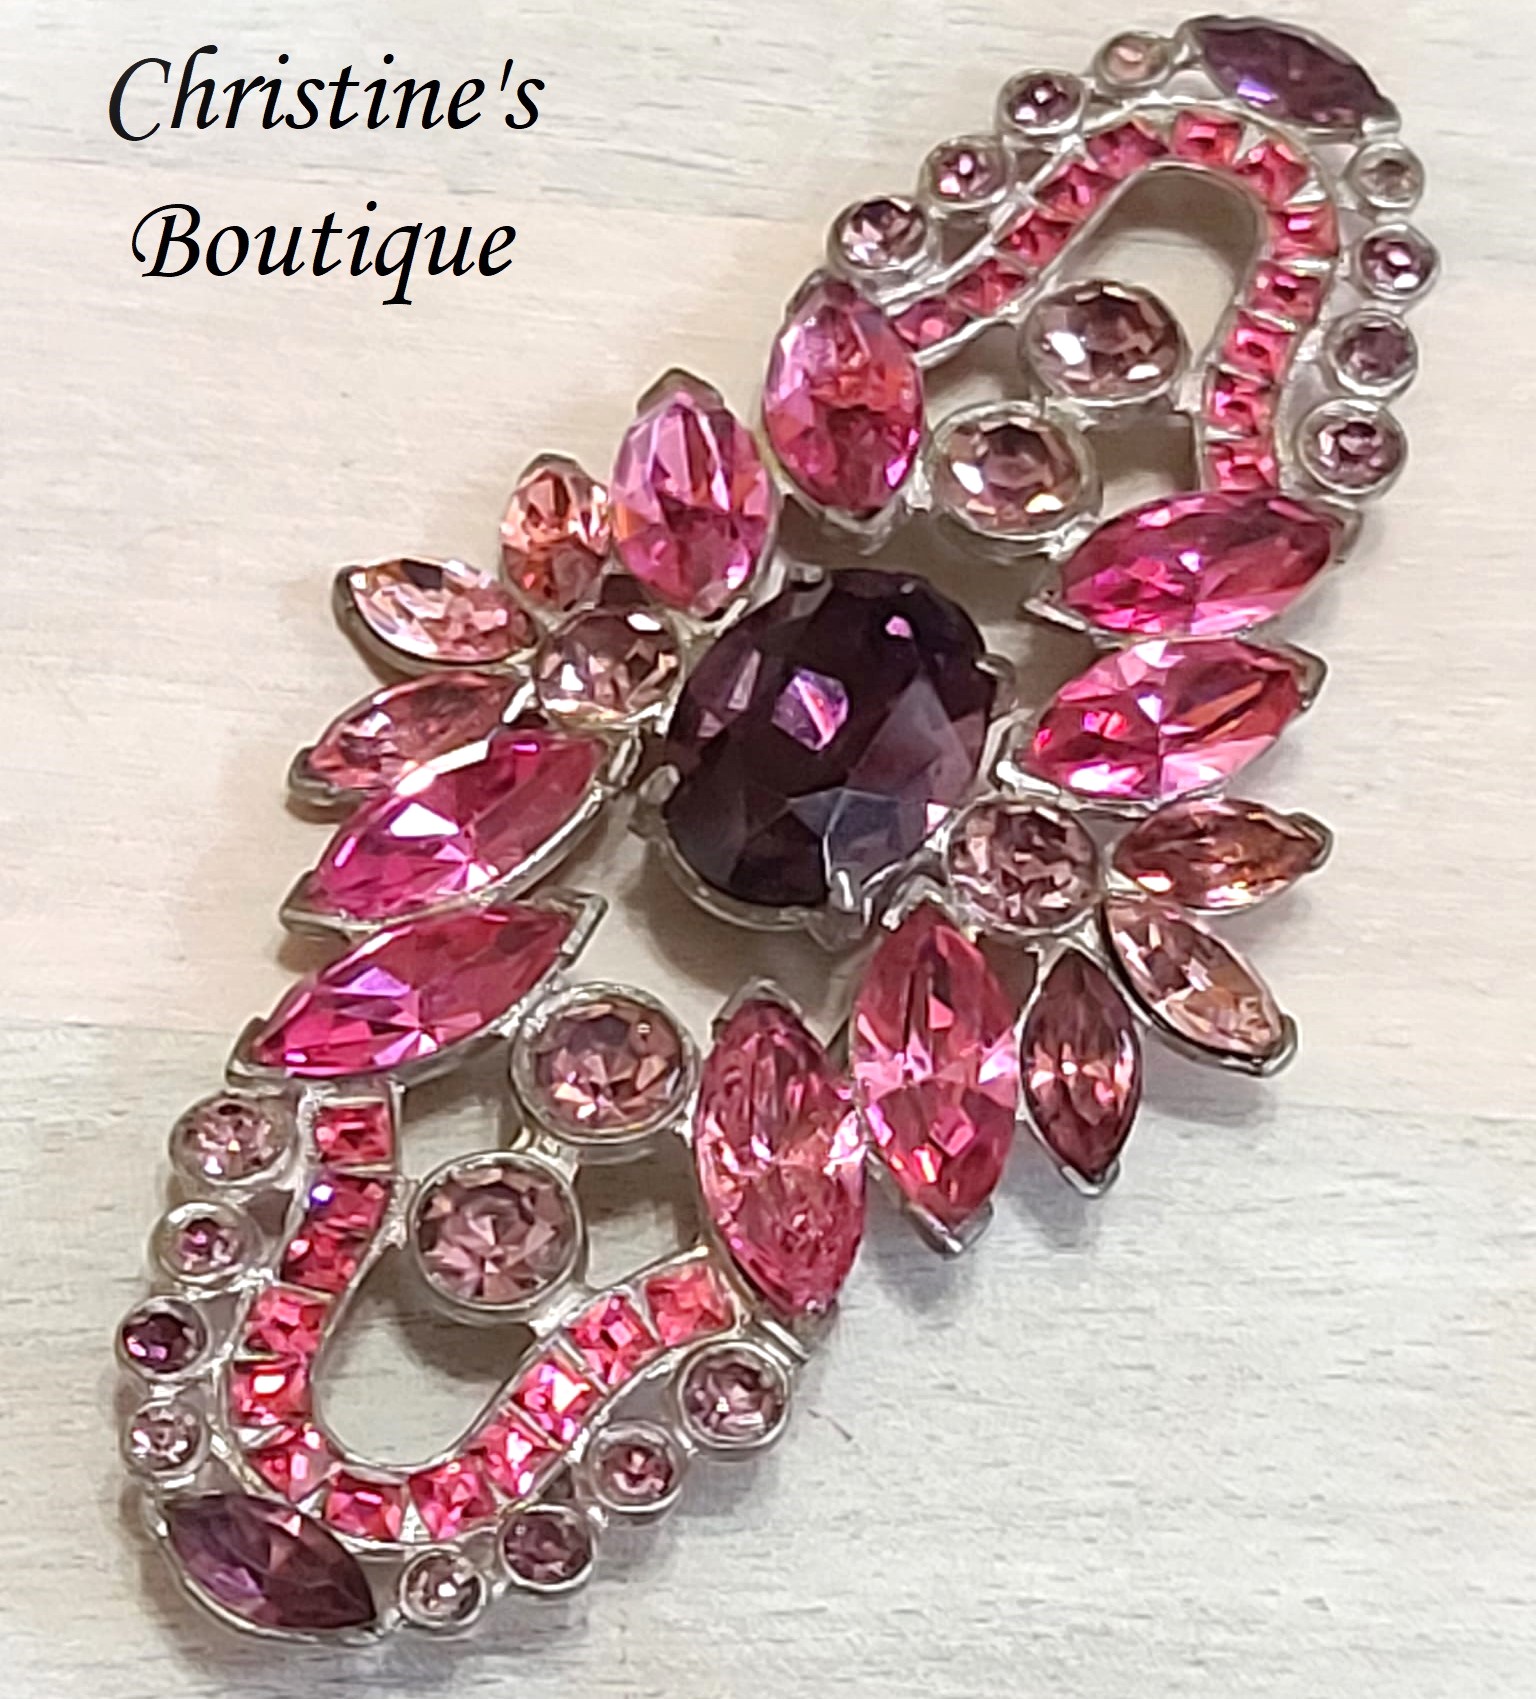 Vintage statement brooch, pin rhinestones pin with purple and pink rhinestsones 3 1/2"